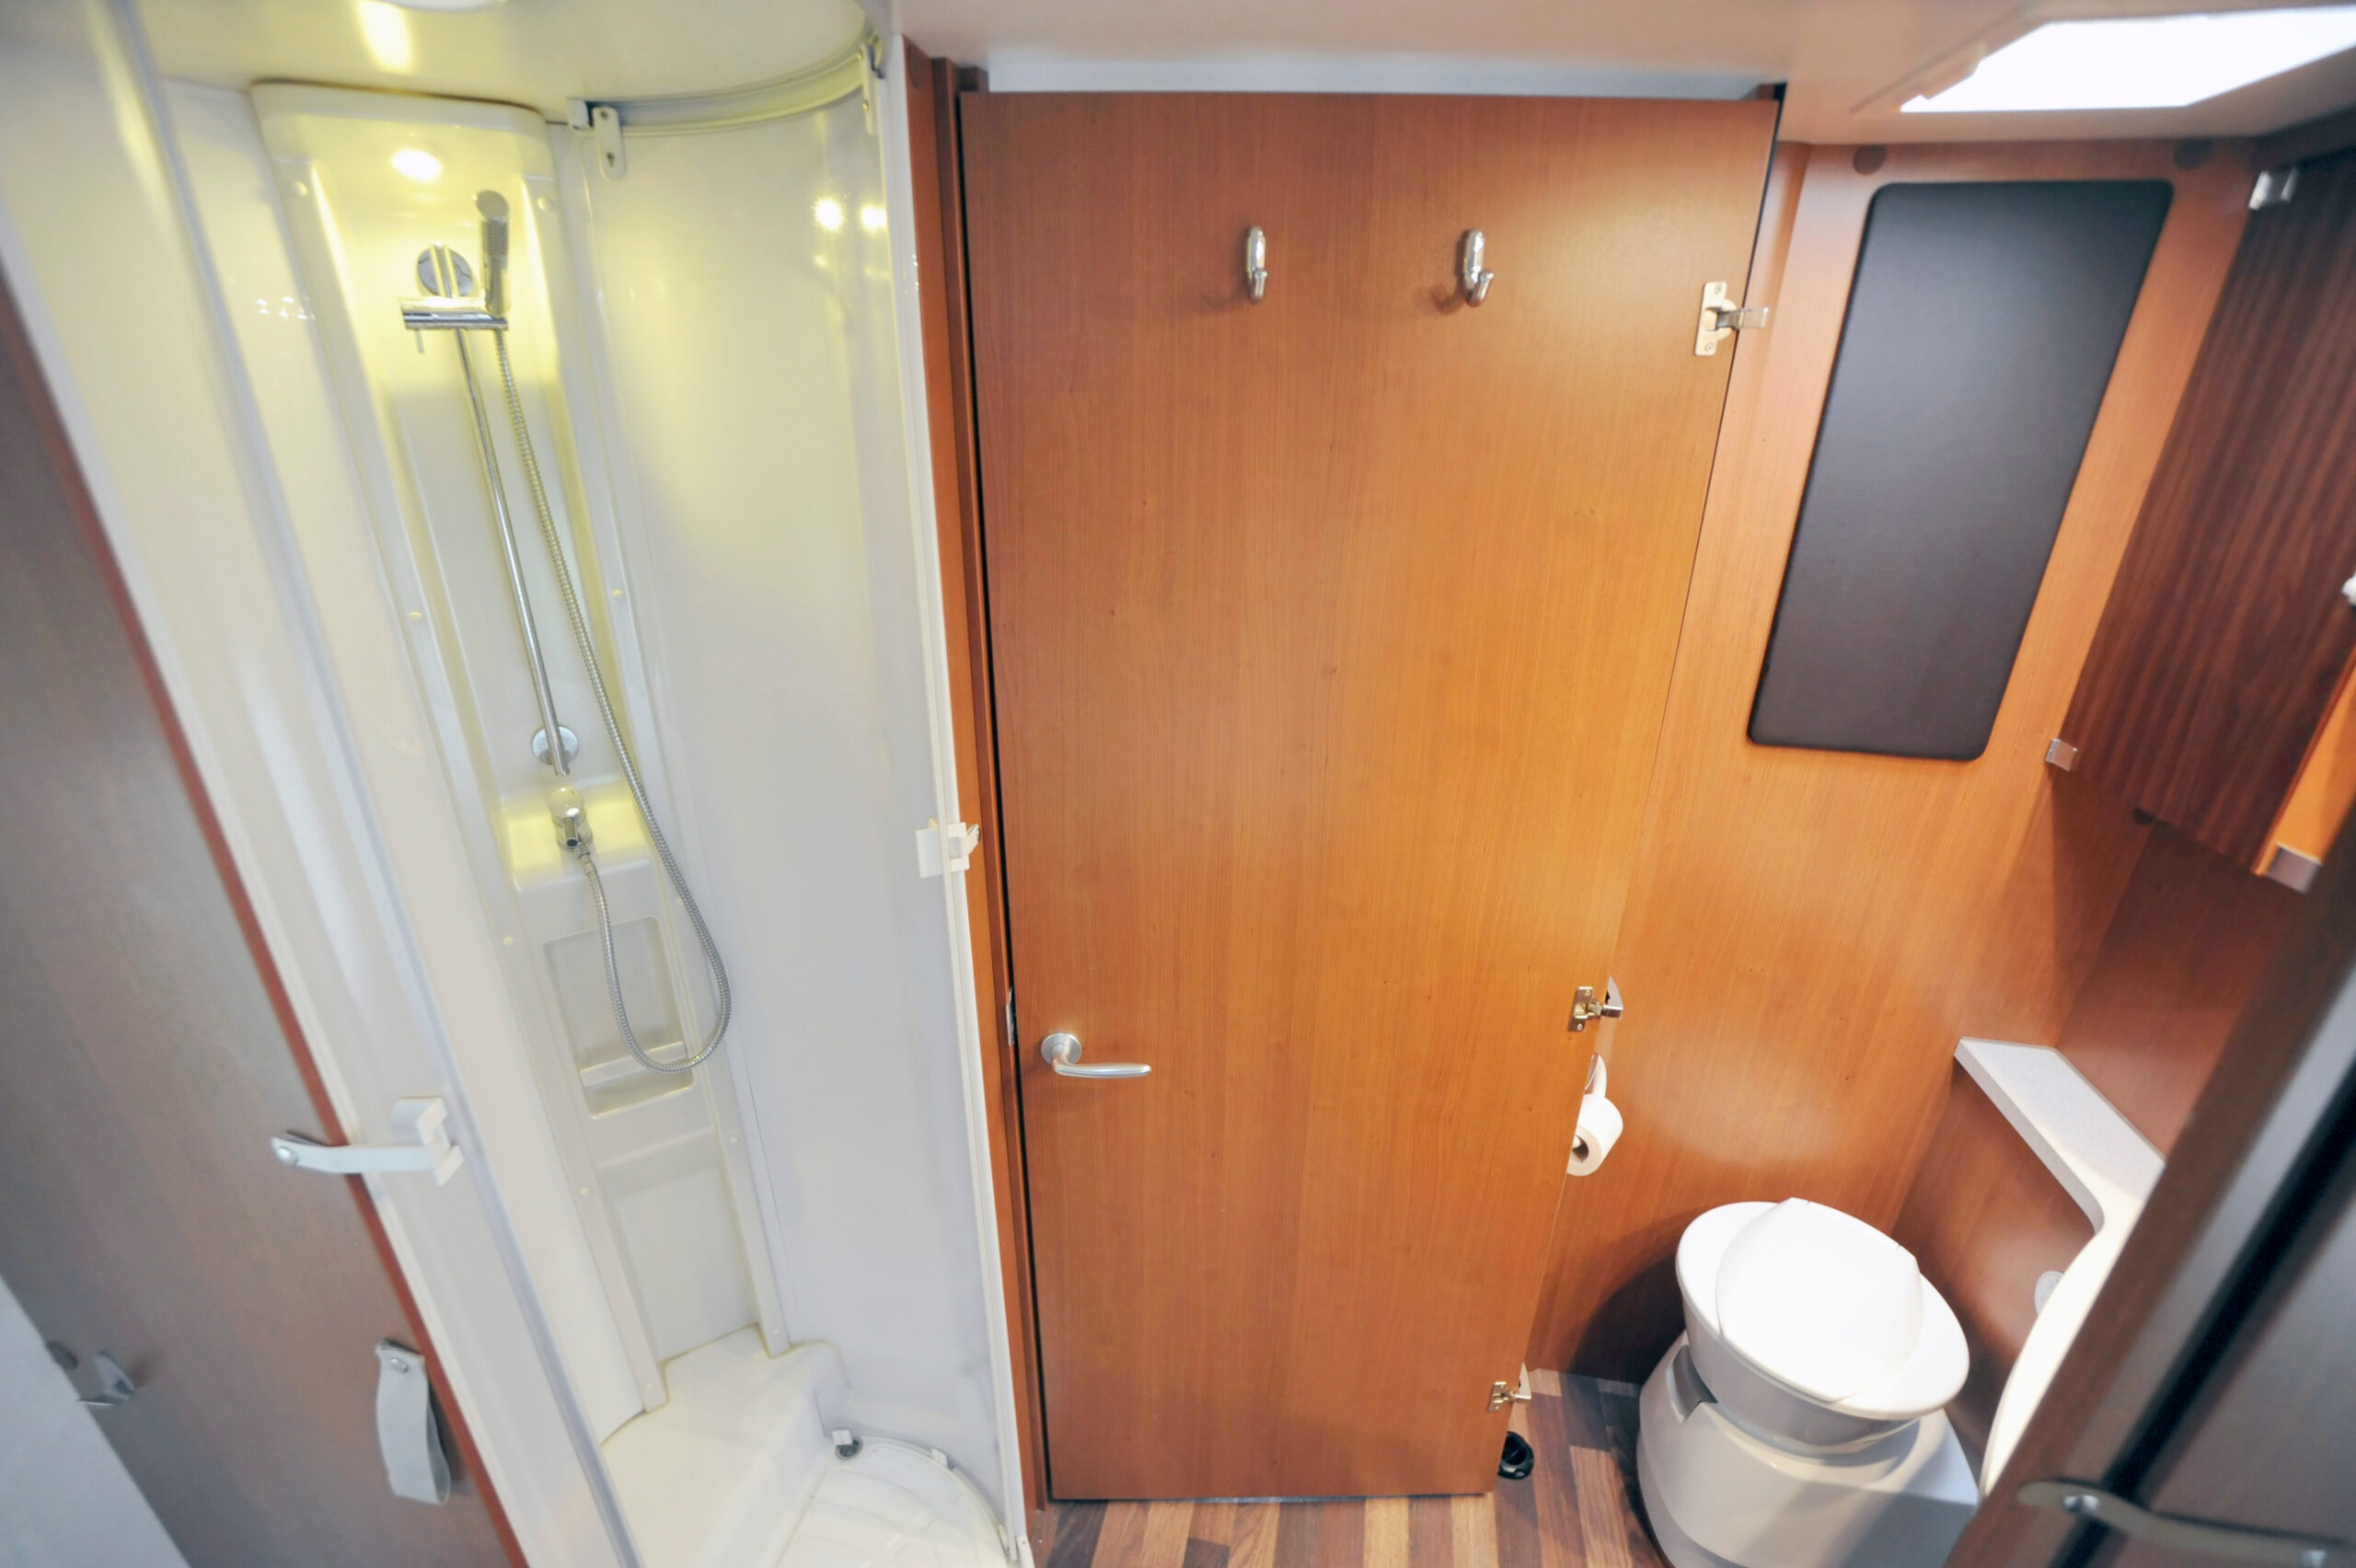 RV shower and toilet - feature image for How To Remodel An RV Shower